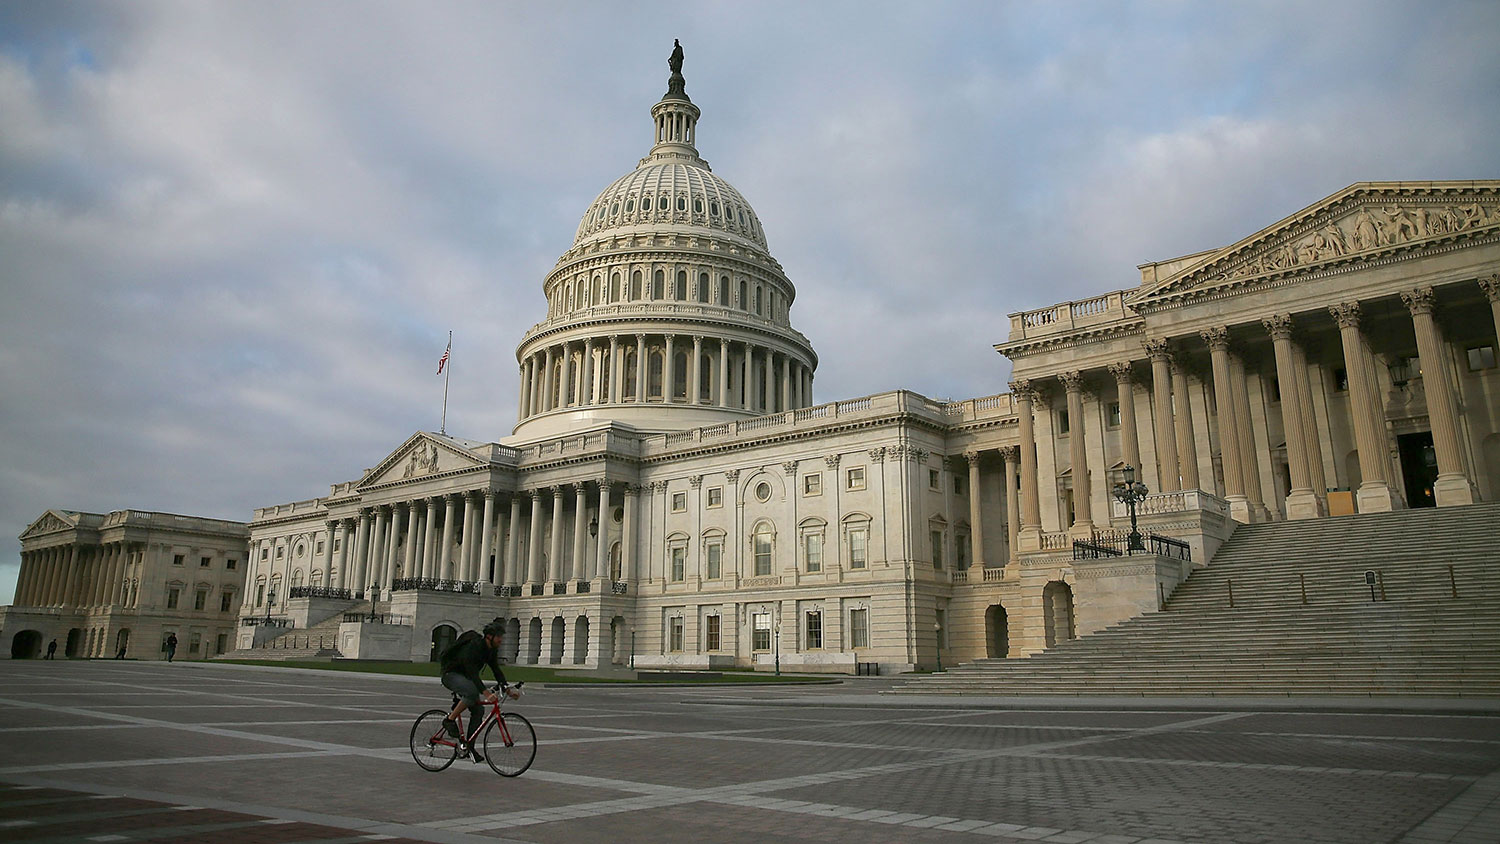 A biker rides past the U.S. Capitol , October 14, 2013 in Washington, DC.
